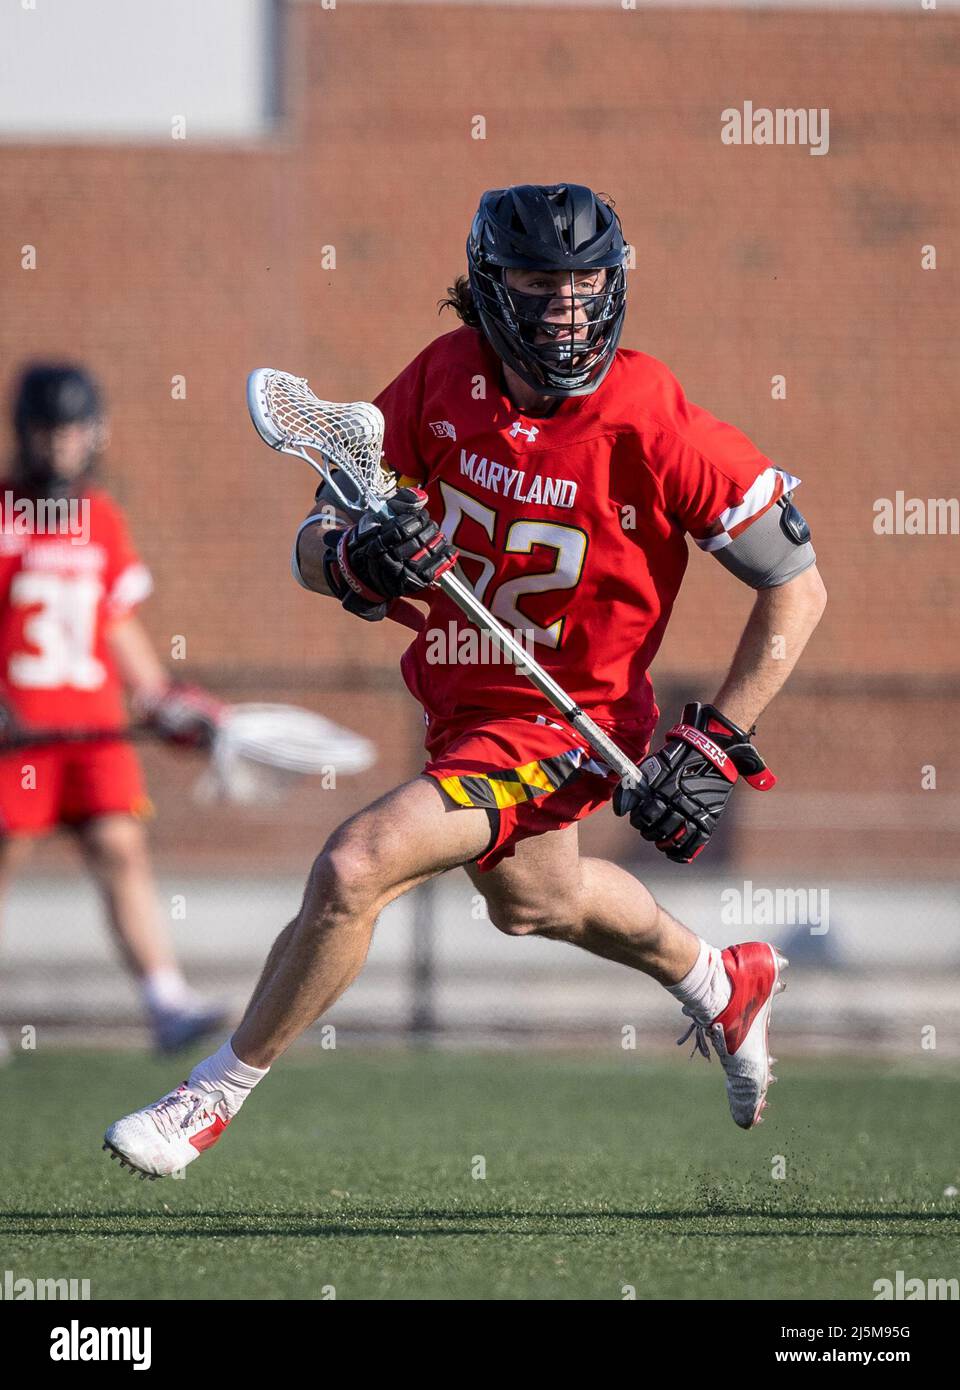 April 23, 2022: Maryland faceoff specialist Luke Wierman (52) wins the opening faceoff during the ncaa men's lacrosse regular season finale between the Maryland Terrapins and the Johns Hopkins Blue Jays at Homewood Field in Baltimore, Maryland Photographer: Cory Royster Stock Photo